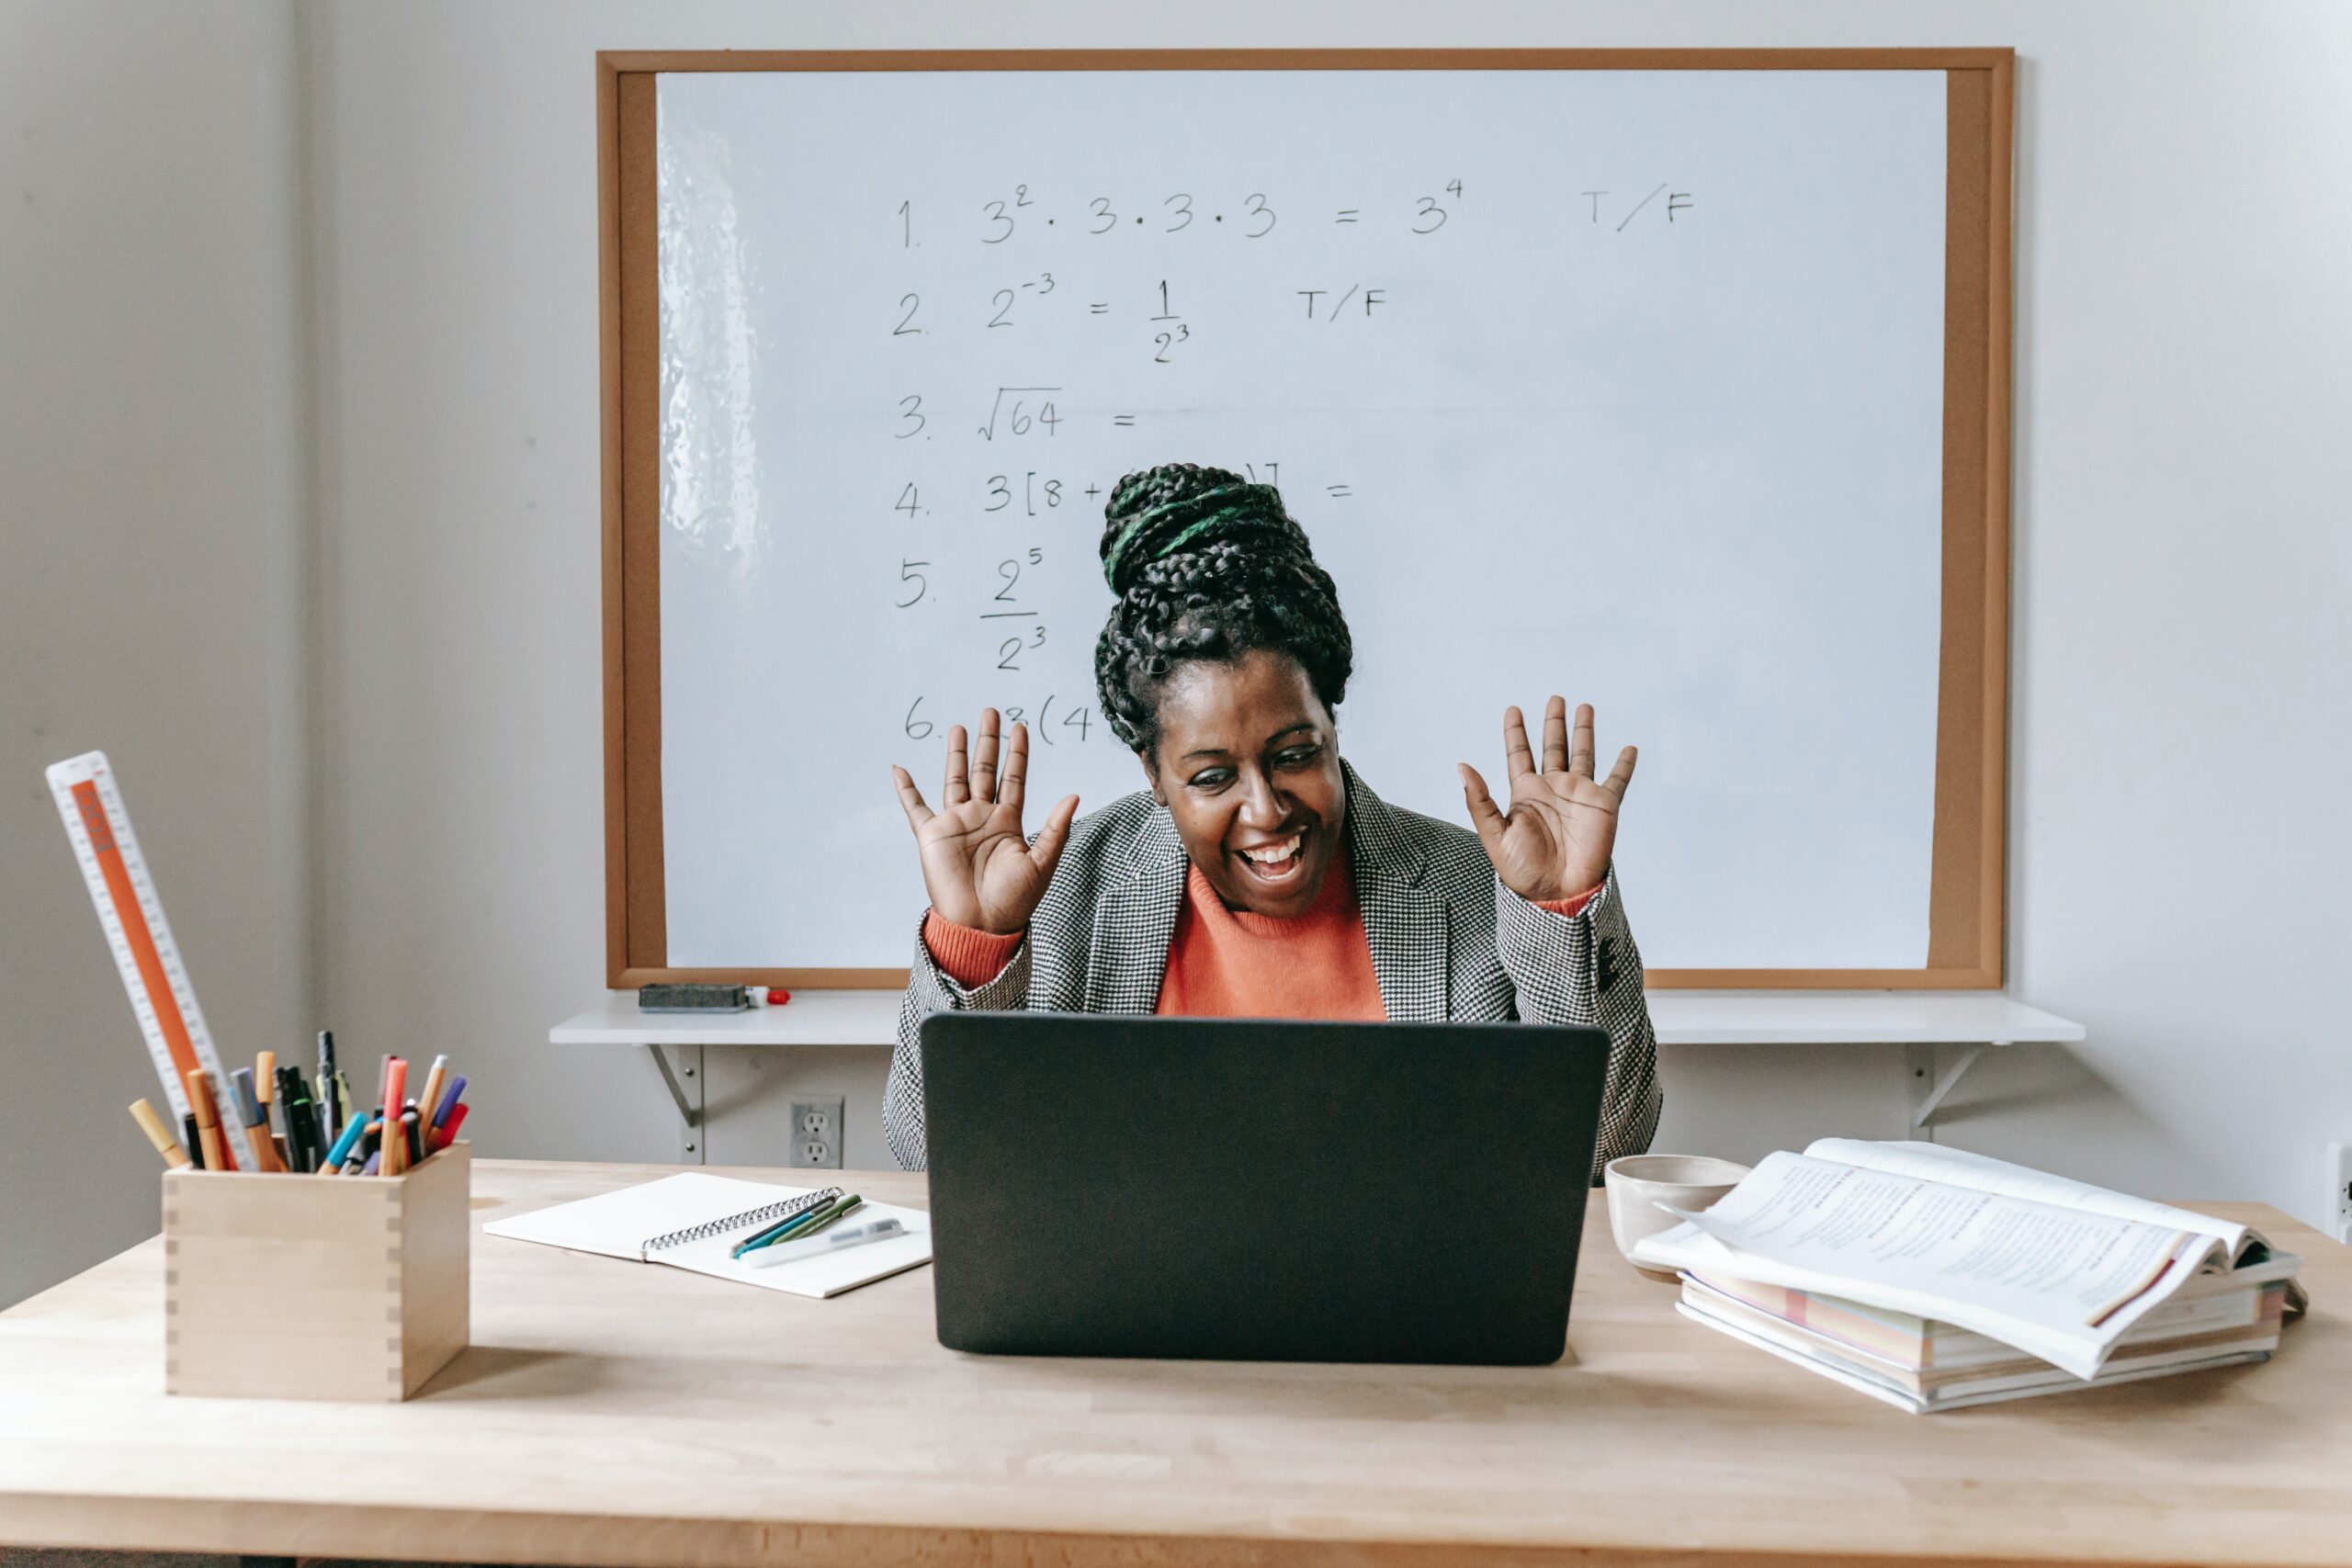 Image of a happy Black woman with a orange shirt and grey blazer using a laptop for online work in a classroom